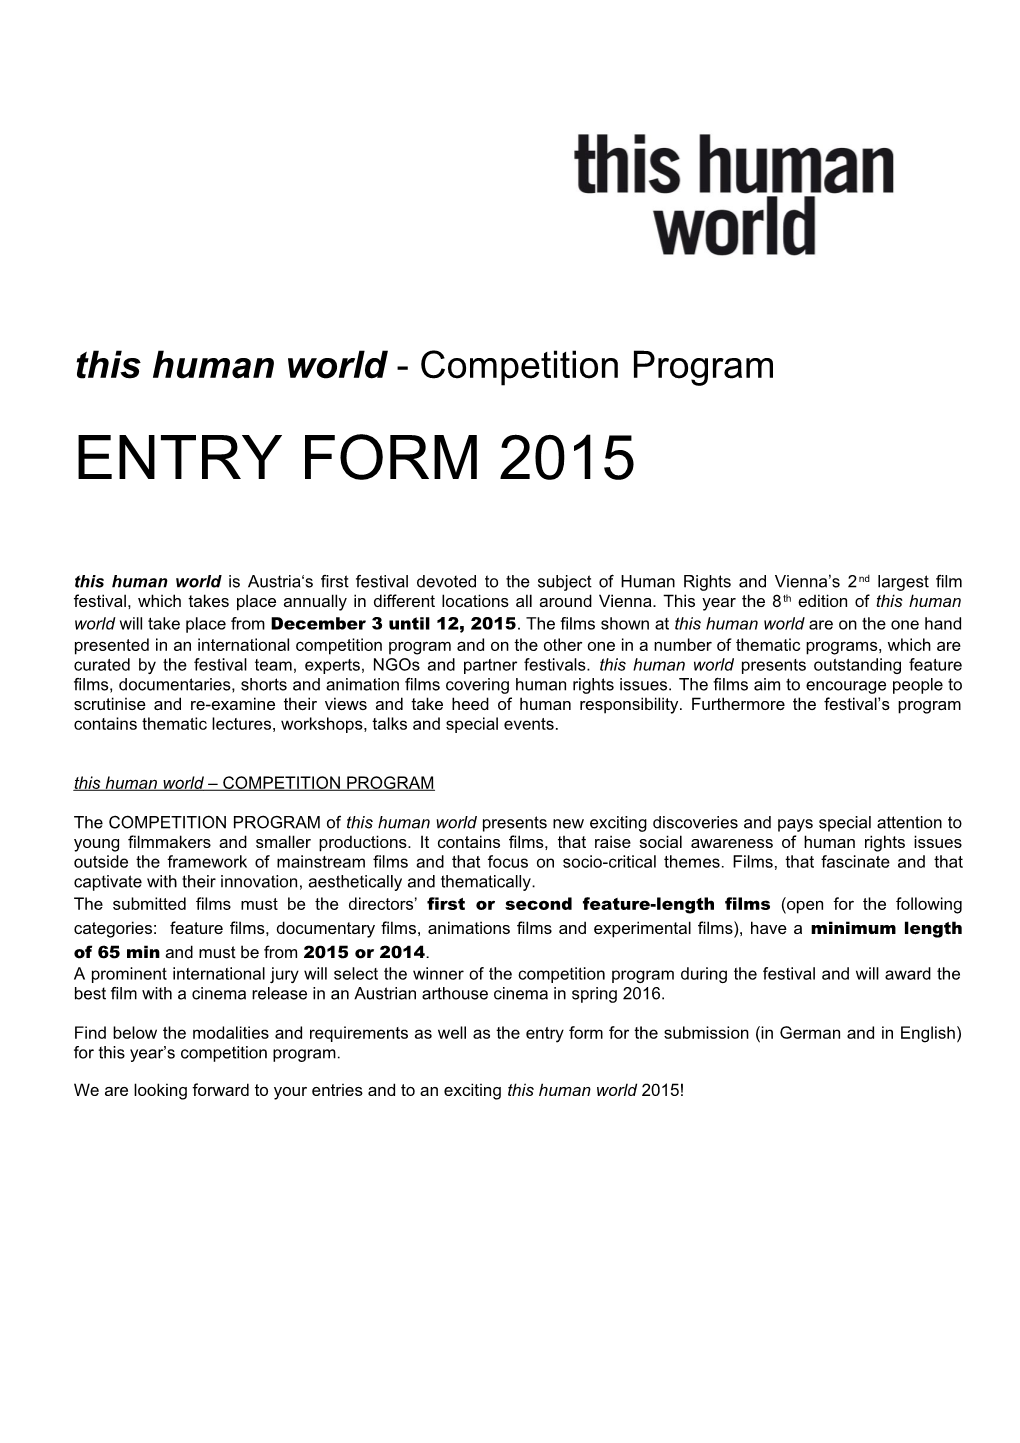 This Human World - Competition Program